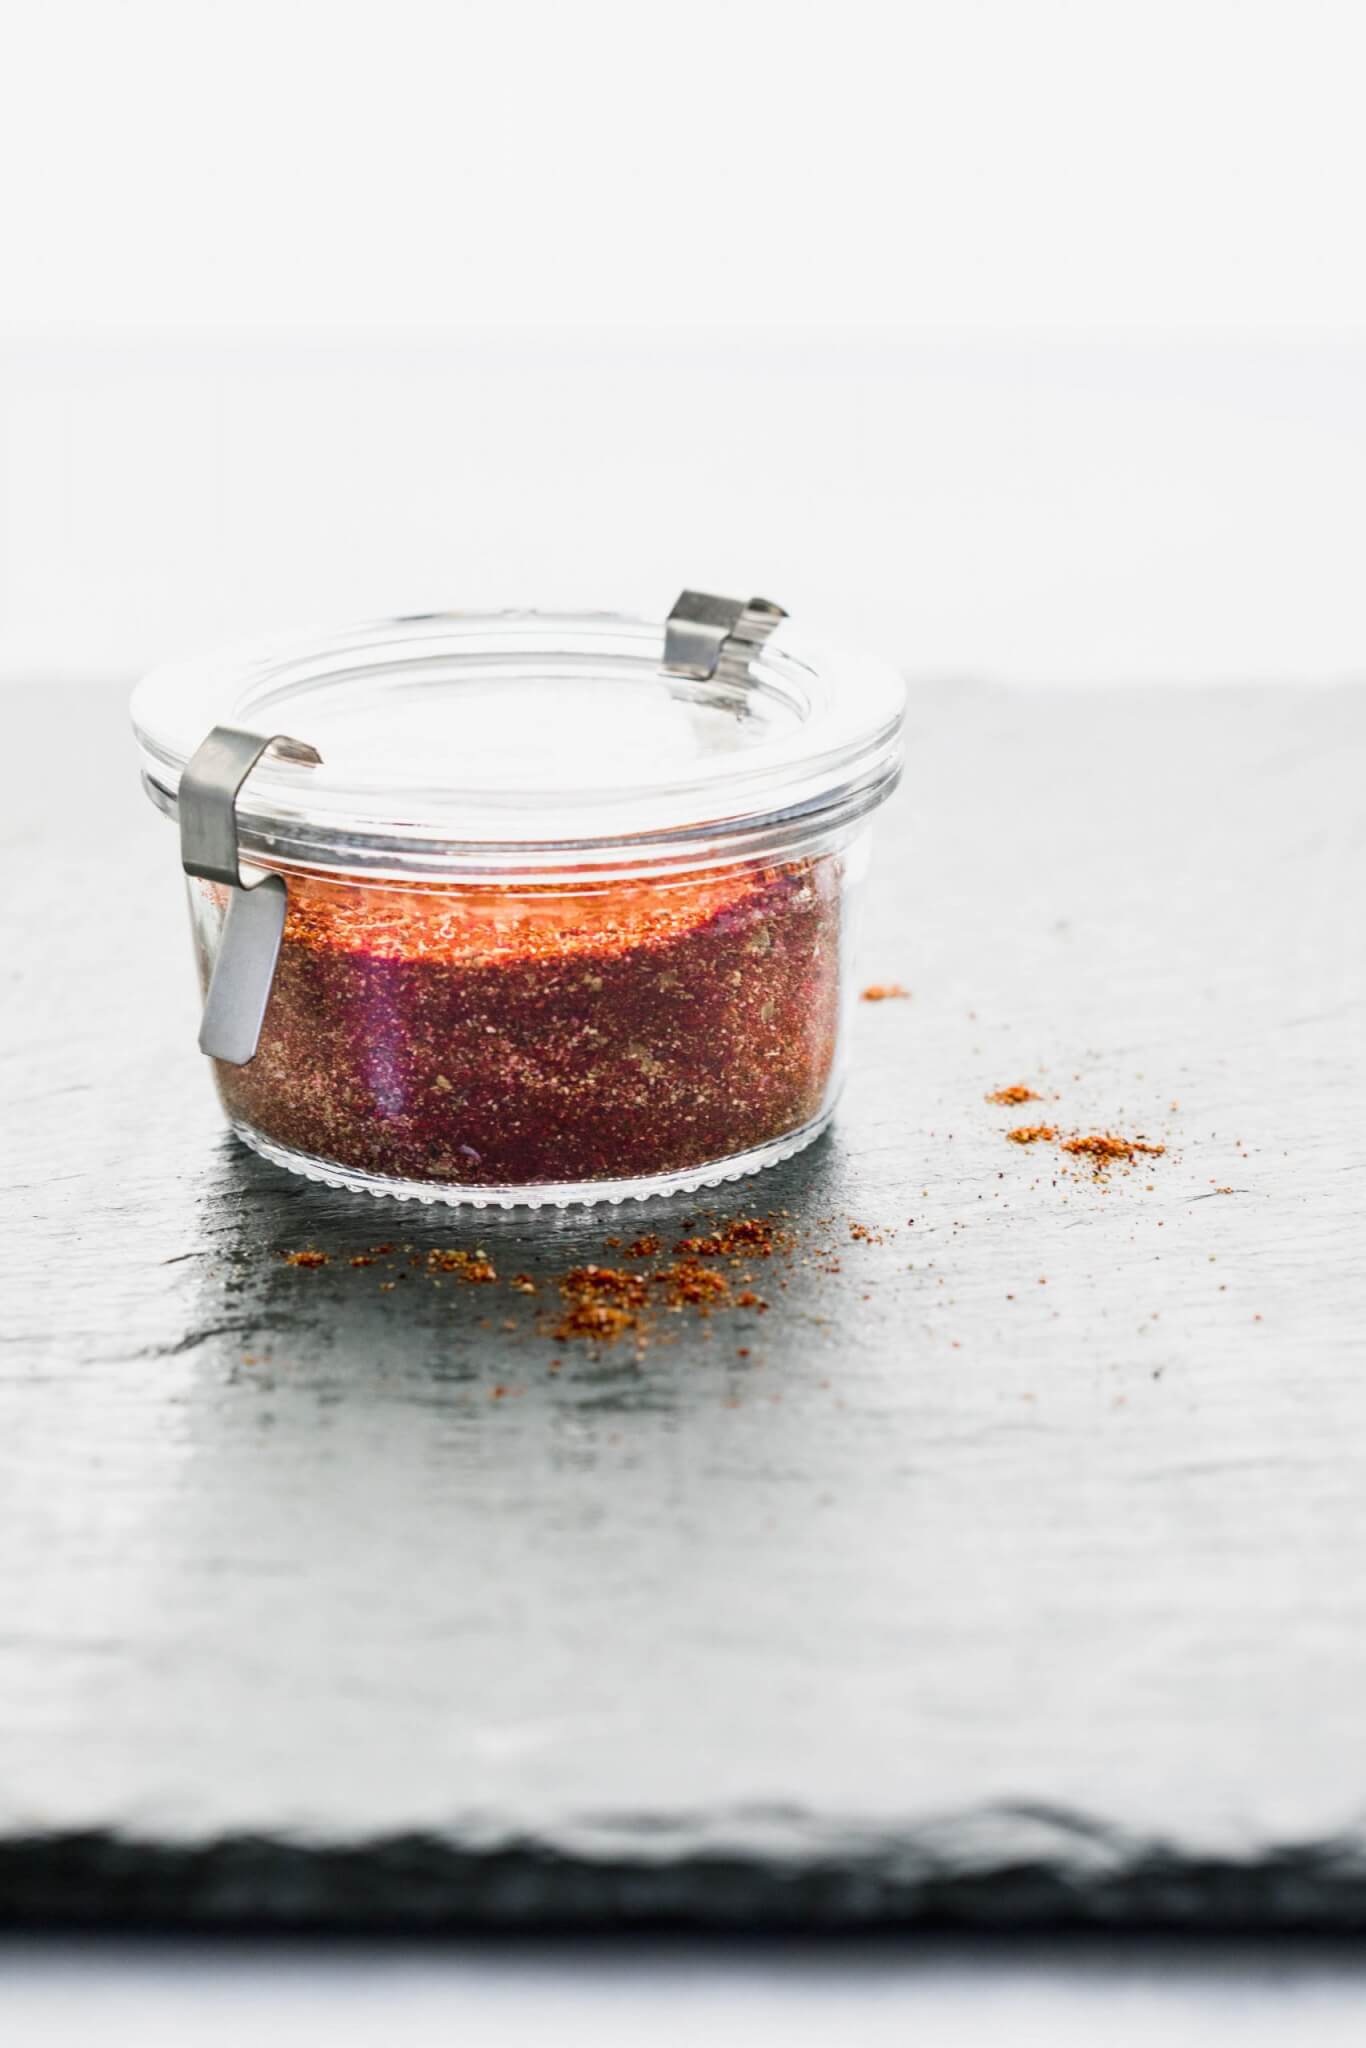 SIDE VIEW OF COMBINED TACO SEASONING IN GLASS CONTAINER WITH LID